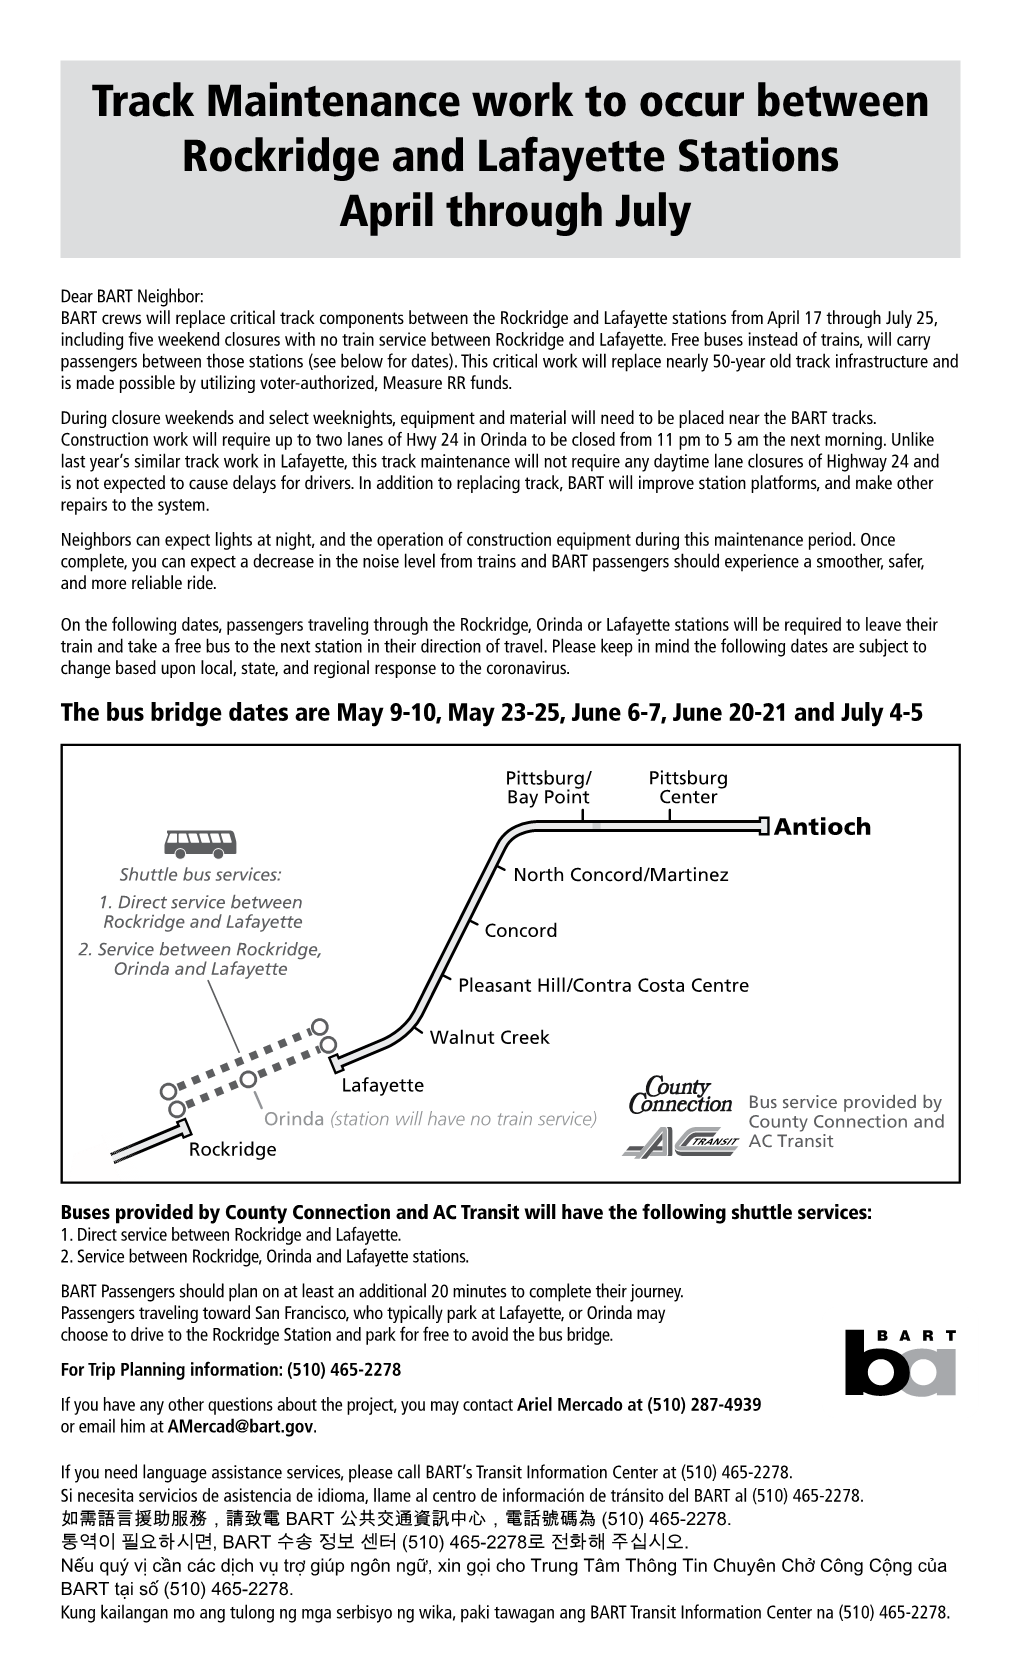 Track Maintenance Work to Occur Between Rockridge and Lafayette Stations April Through July